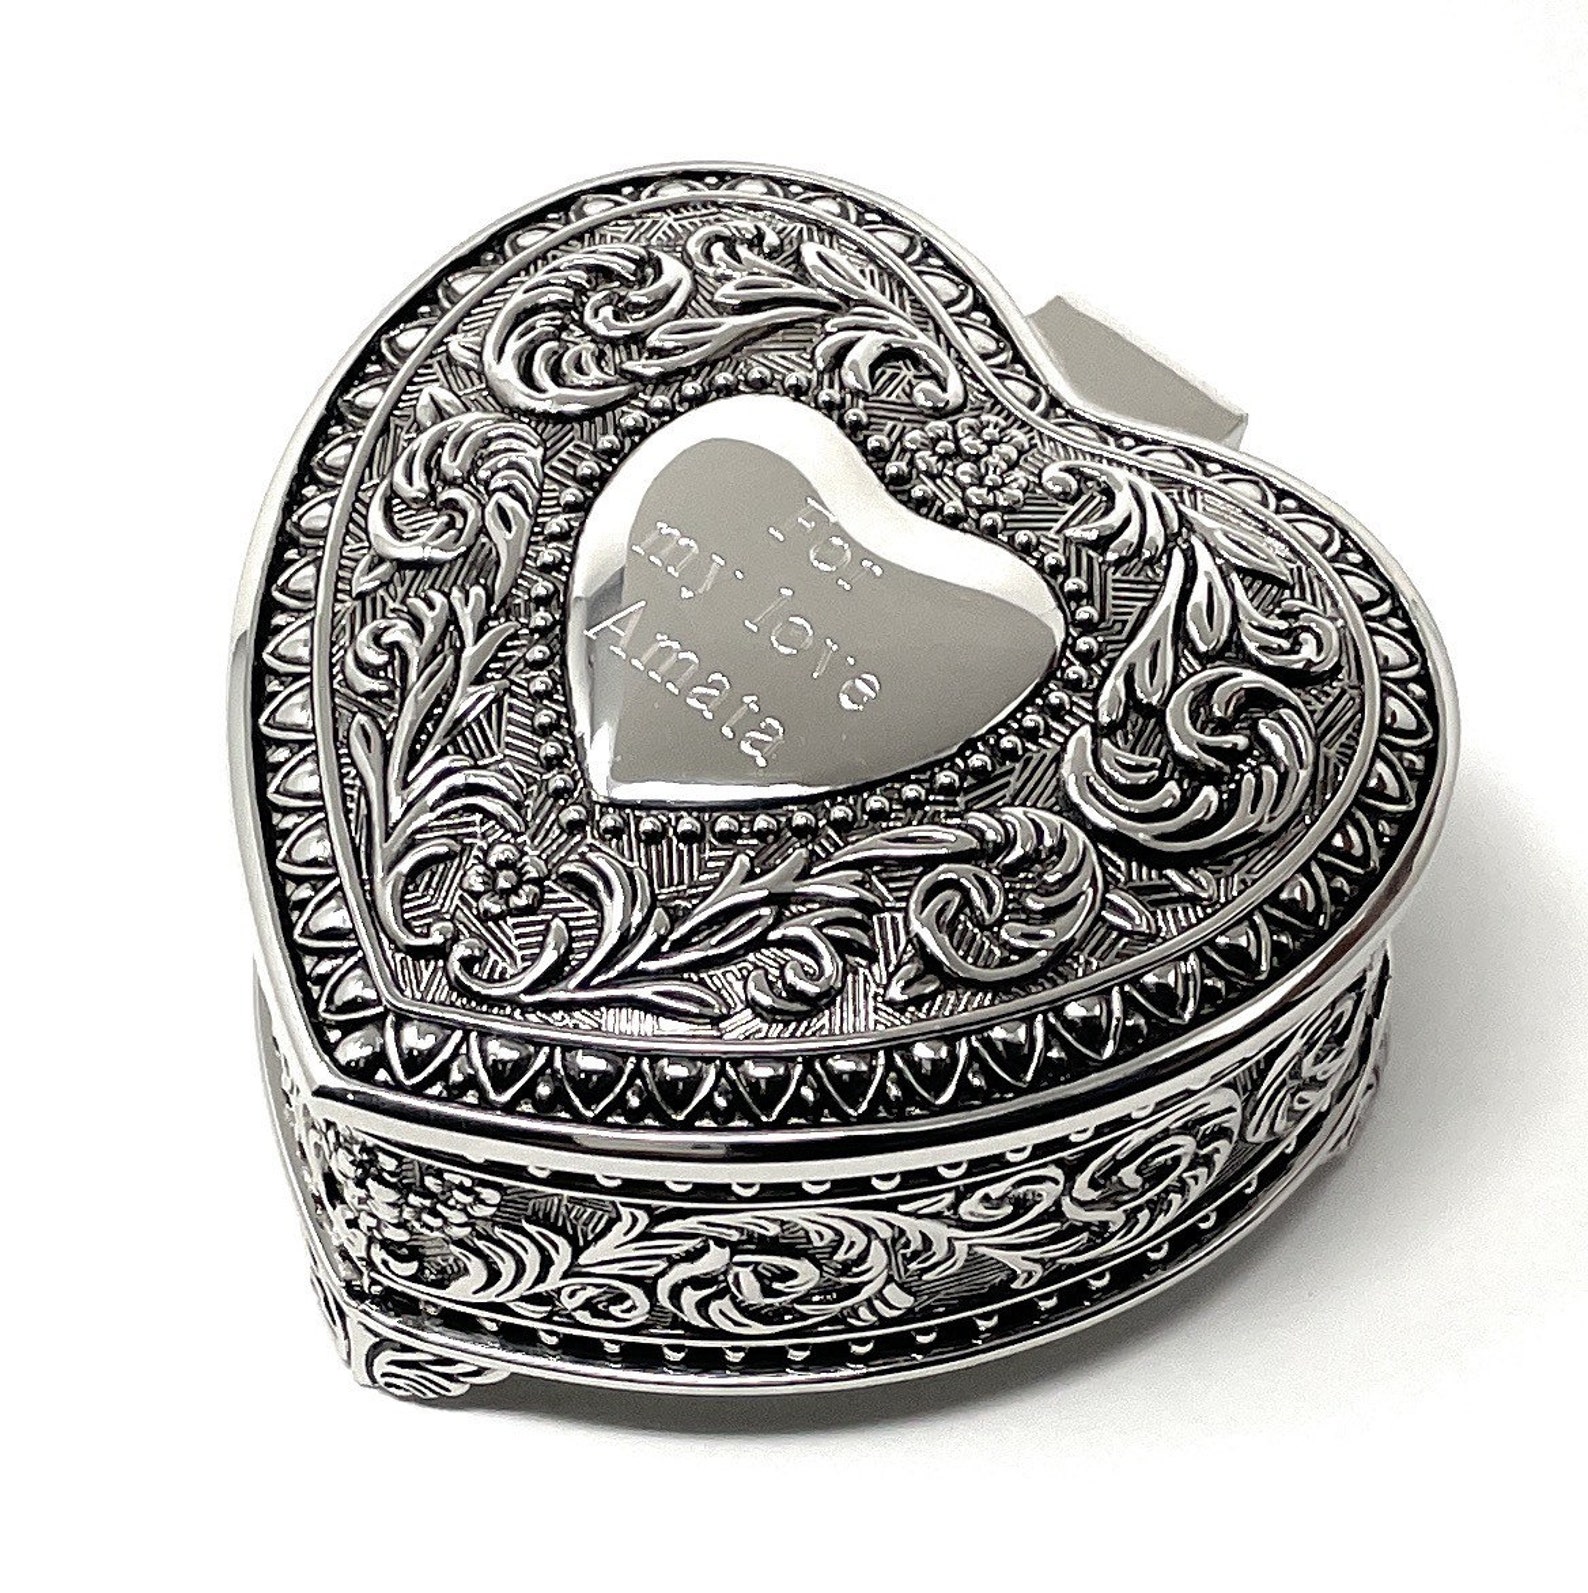 Personalized Jewelry Box Antique Design Heart Shaped - Etsy